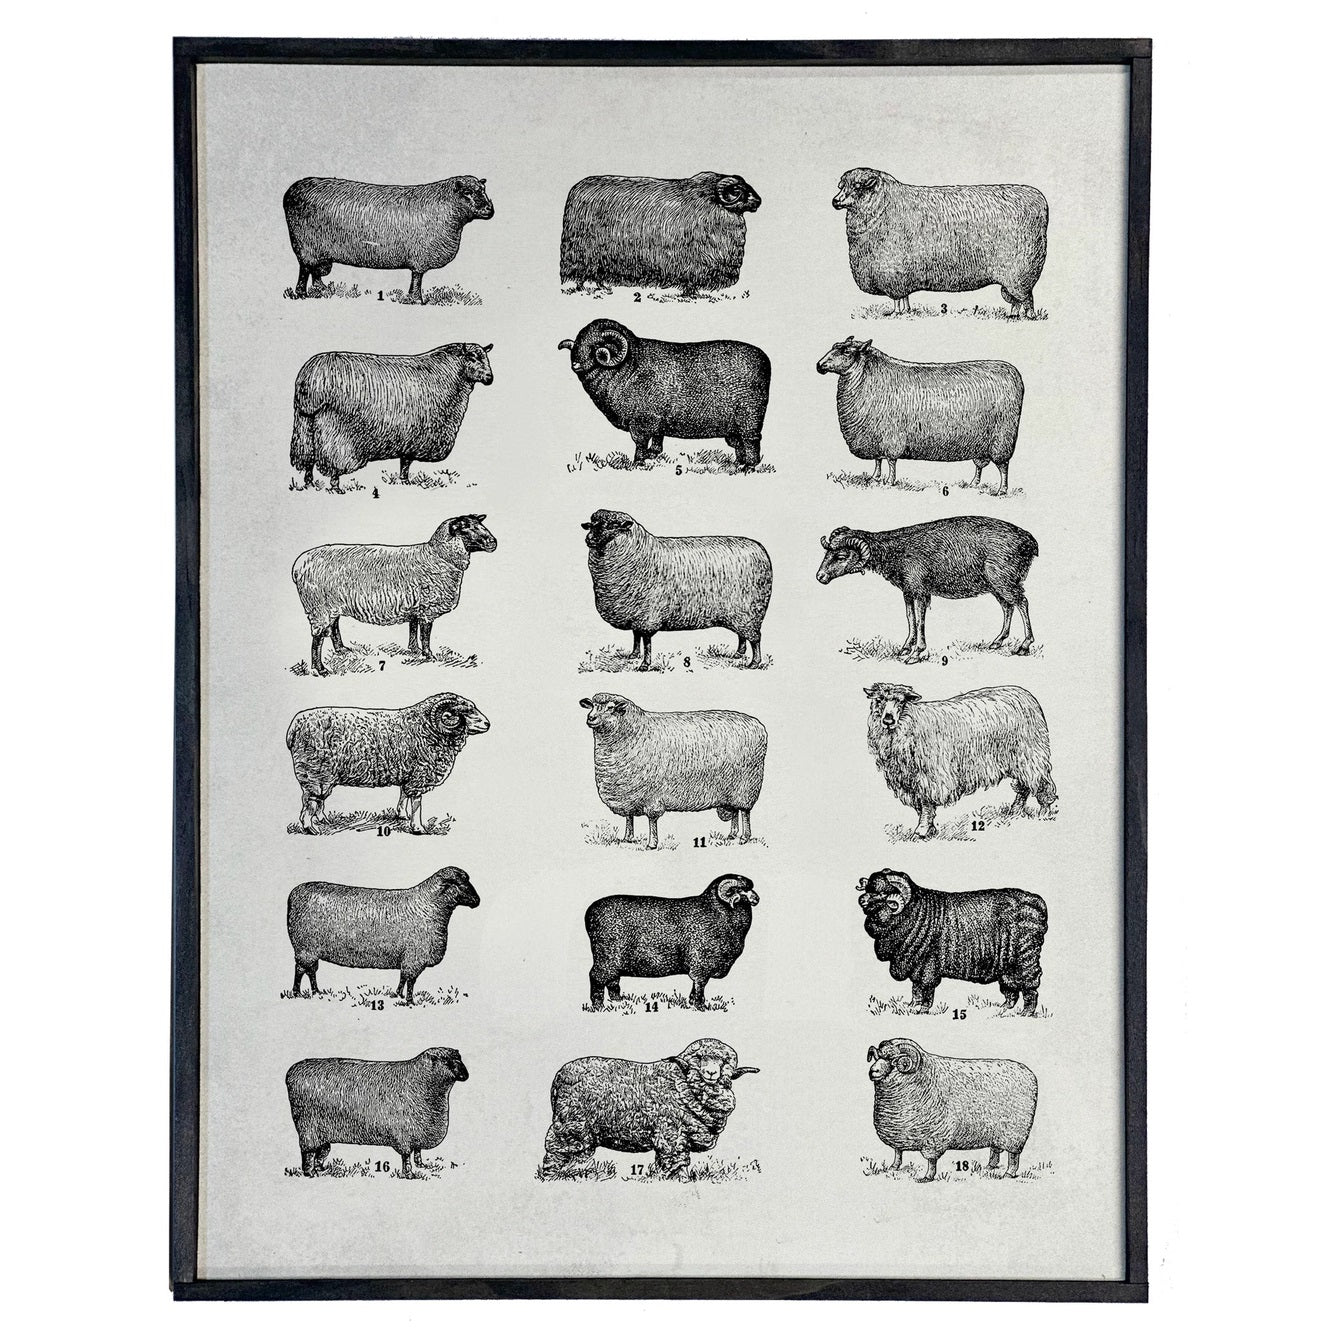 Reminiscent of old school teaching charts, this Vintage Sheep Chart Illustration Print adds an antique look to any room. The print comes with a distressed black wood frame that has perfect imperfections, such as knots and other natural wood character for an aged and primitive look.  This Vintage Sheep Chart Illustration Print also has worn edges and an aged appearance. Includes saw tooth hanger on back for easy hanging. Each is handmade in the USA. 10.5” x 14”H